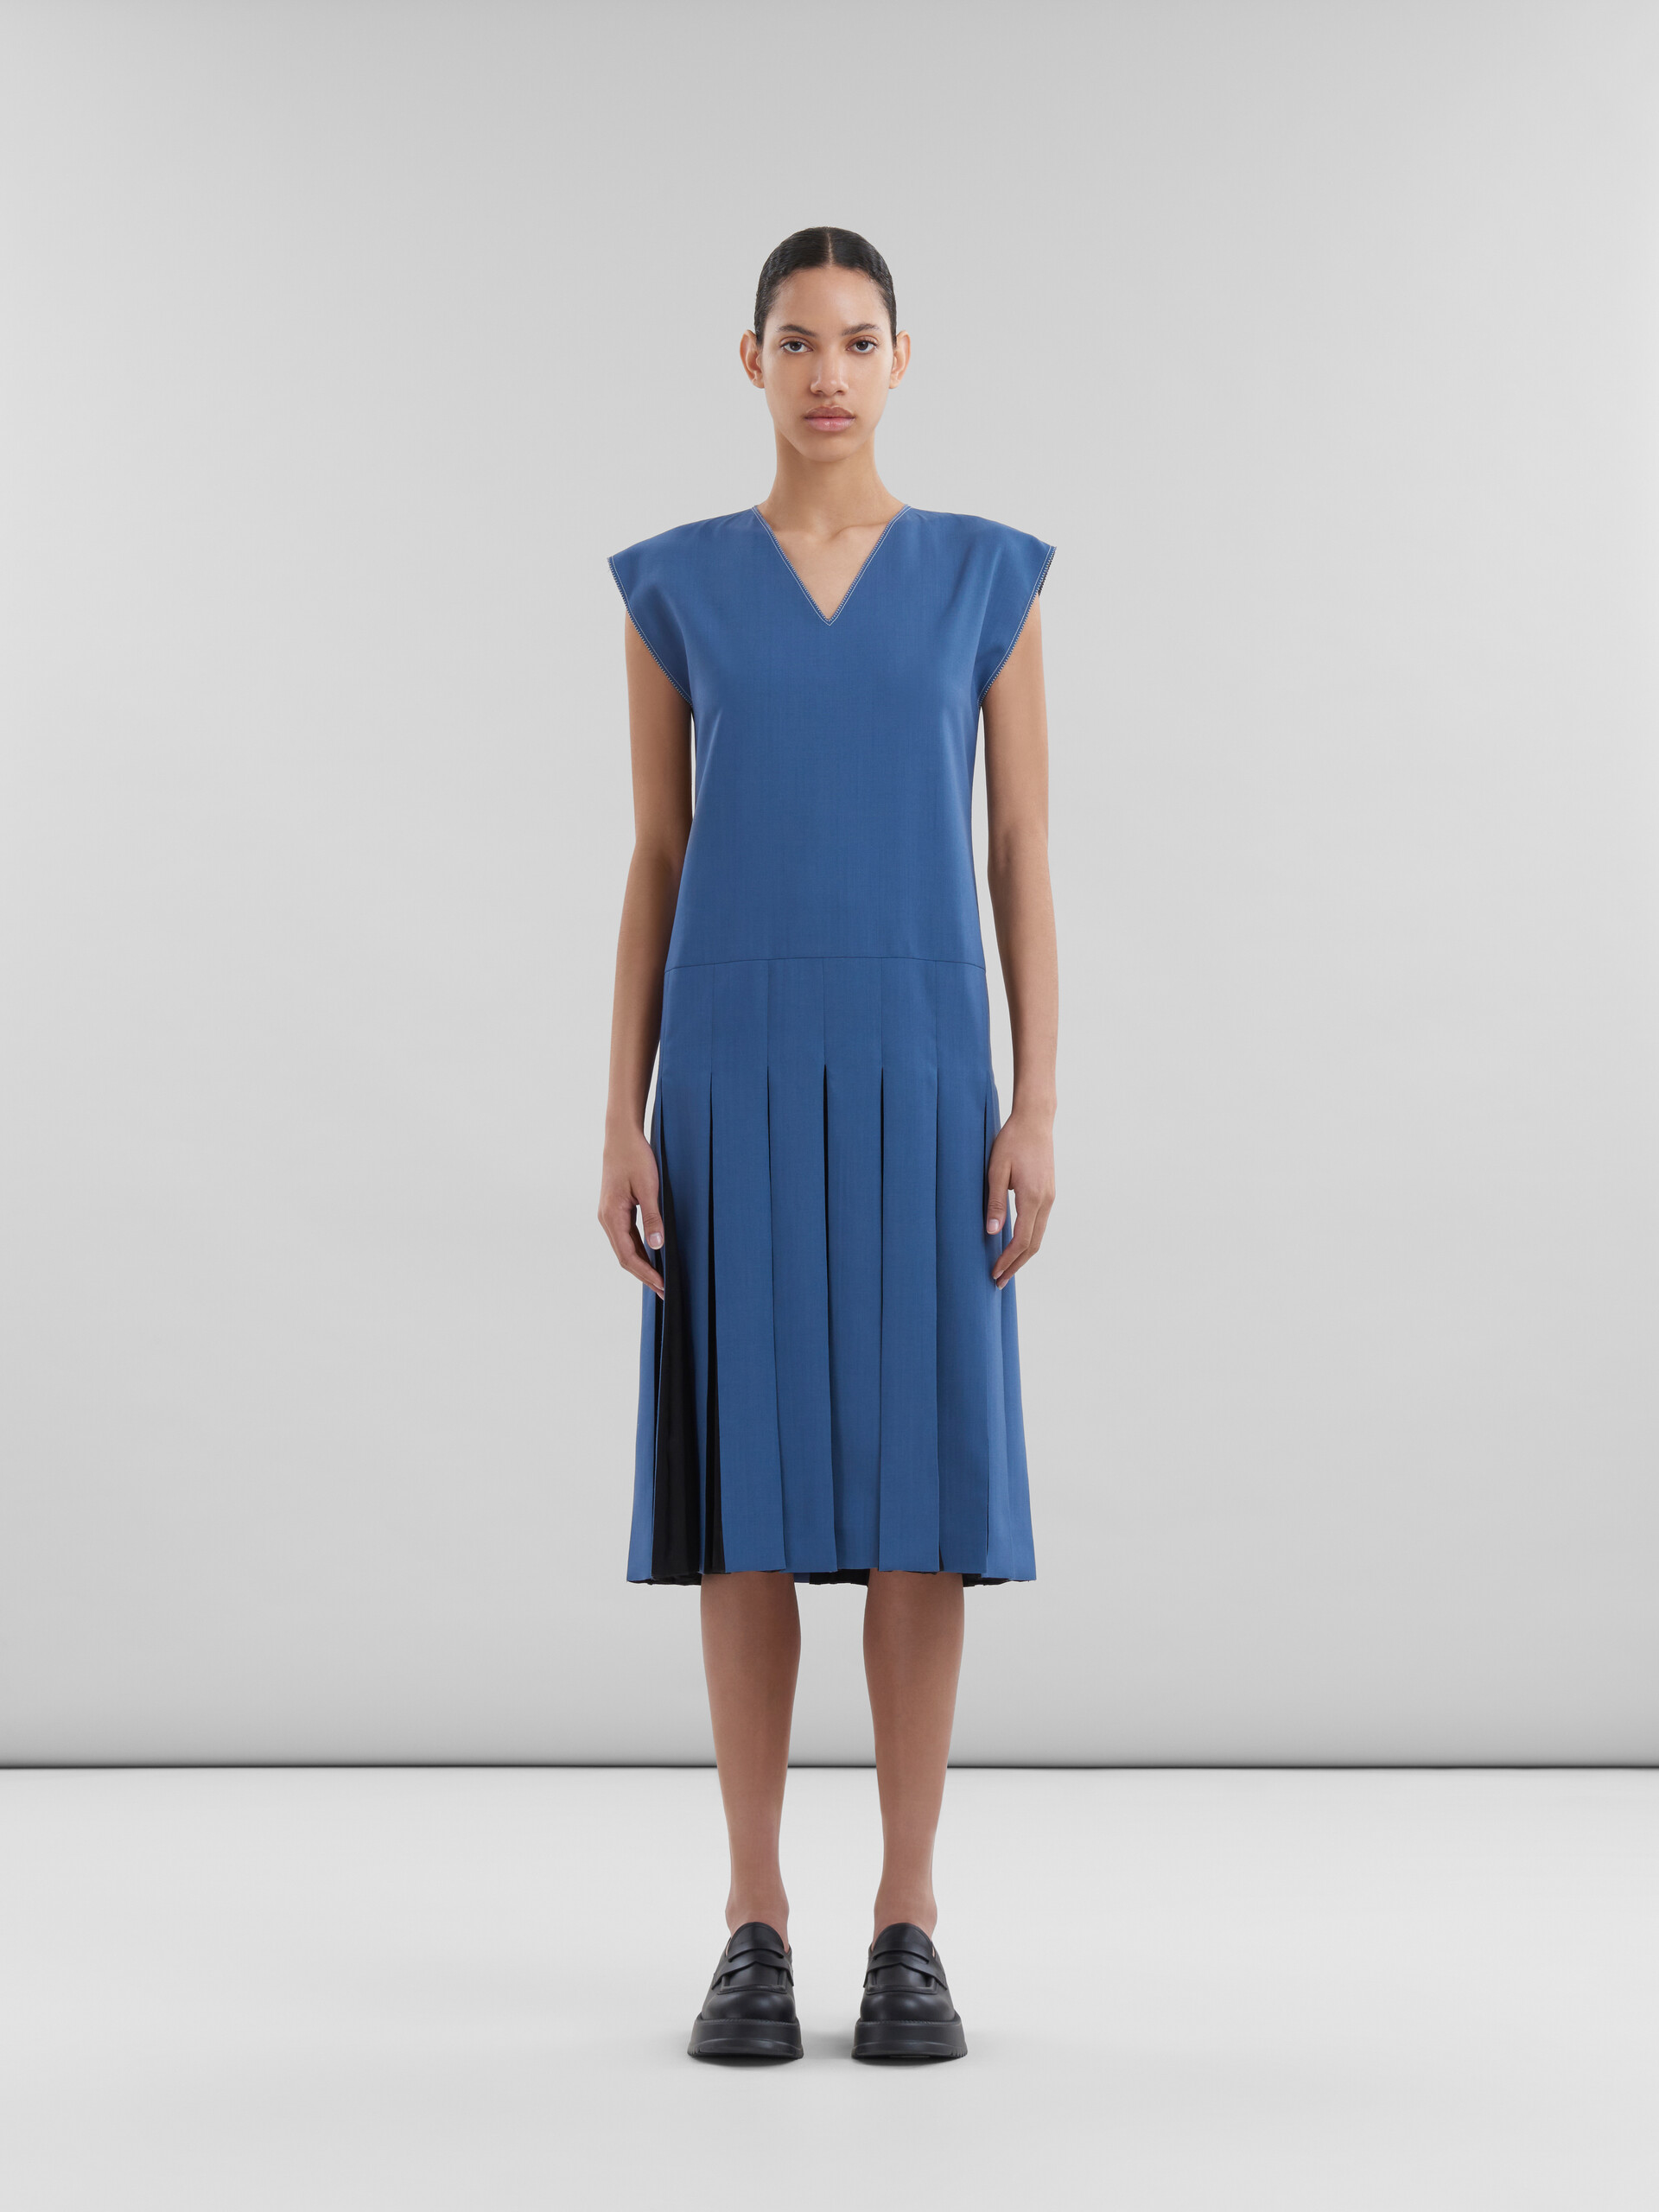 Blue tropical wool dress with contrast pleats - Dresses - Image 2